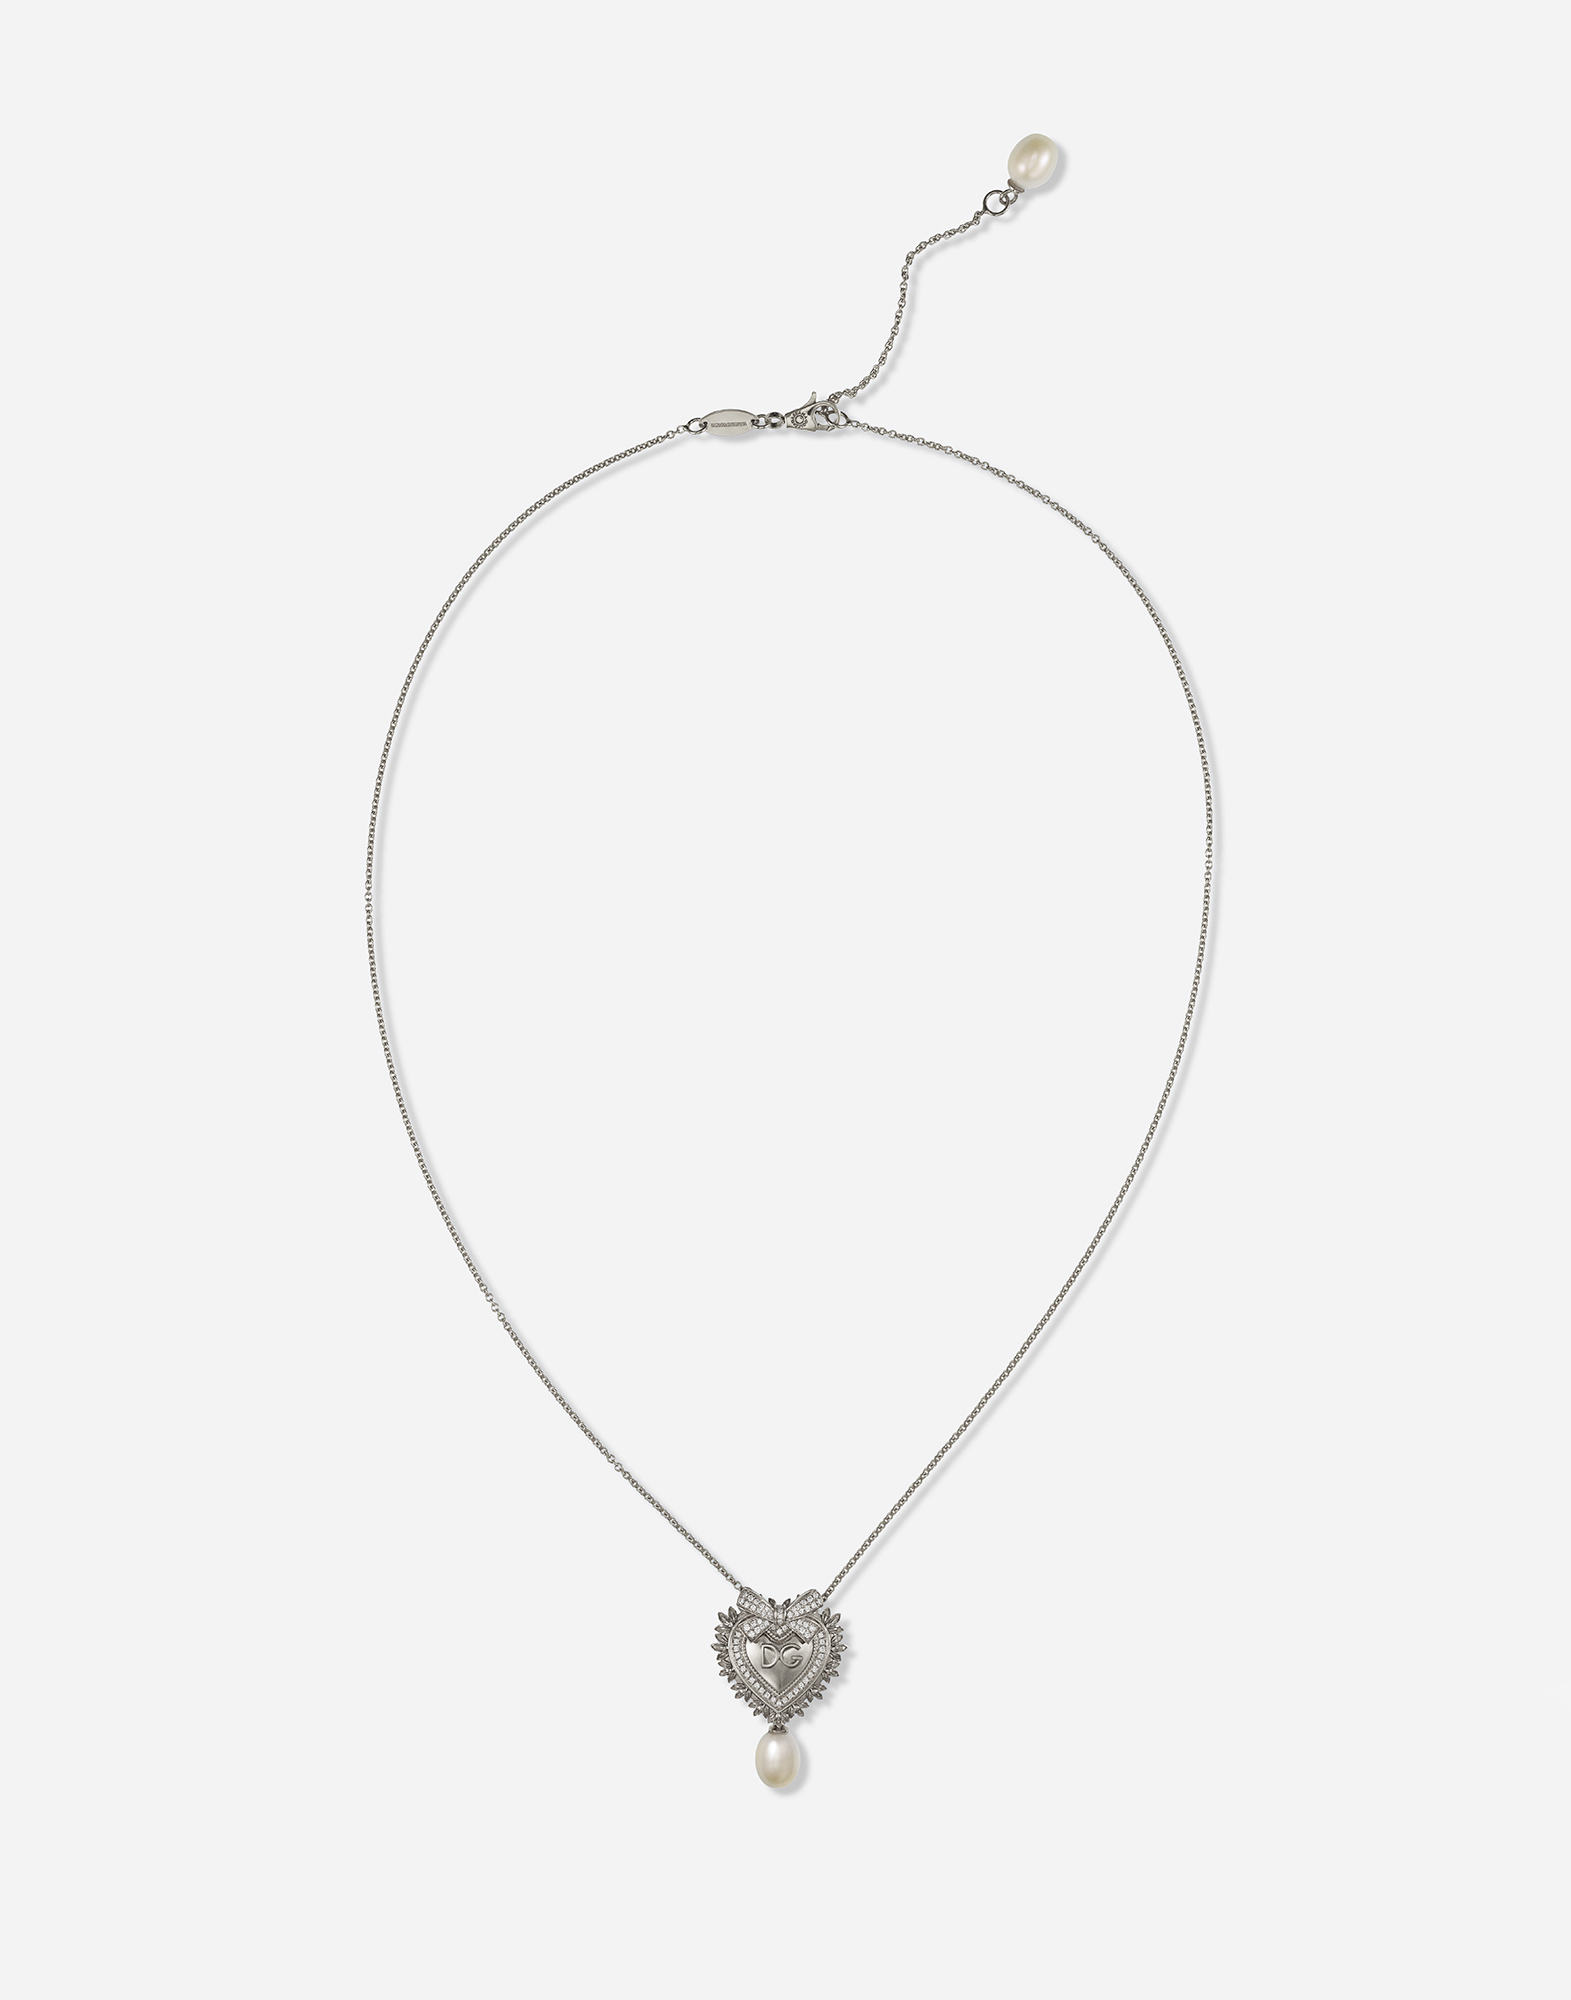 Devotion necklace in white gold with diamonds and pearls in White Gold